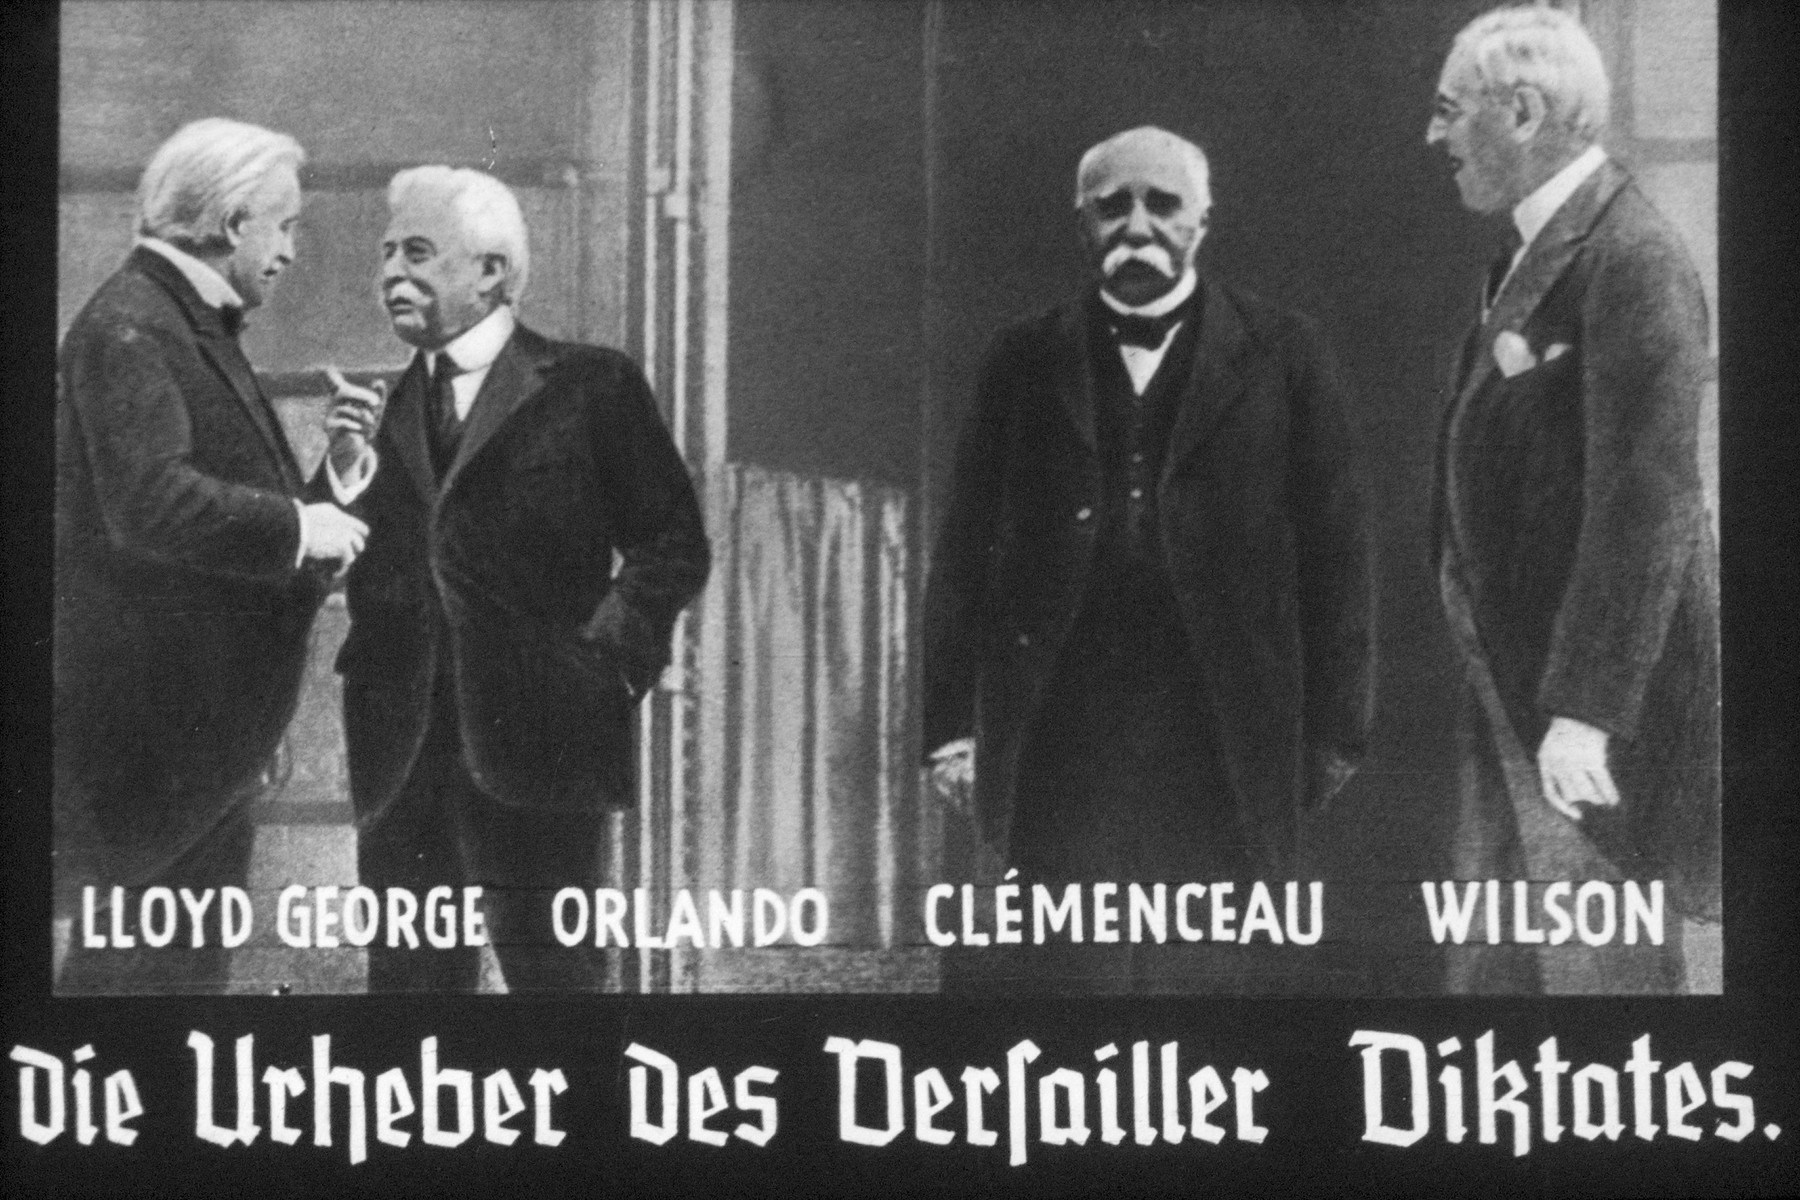 33th slide from a Hitler Youth slideshow about the aftermath of WWI, Versailles, how it was overcome and the rise of Nazism.

Lloyd George Orlando Cemenceau Wilson-Die Urheber des Versailler Diktates.
//
Lloyd George Orlando Cemenceau Wilson-The copyrighters) author of the Versailles Diktat.